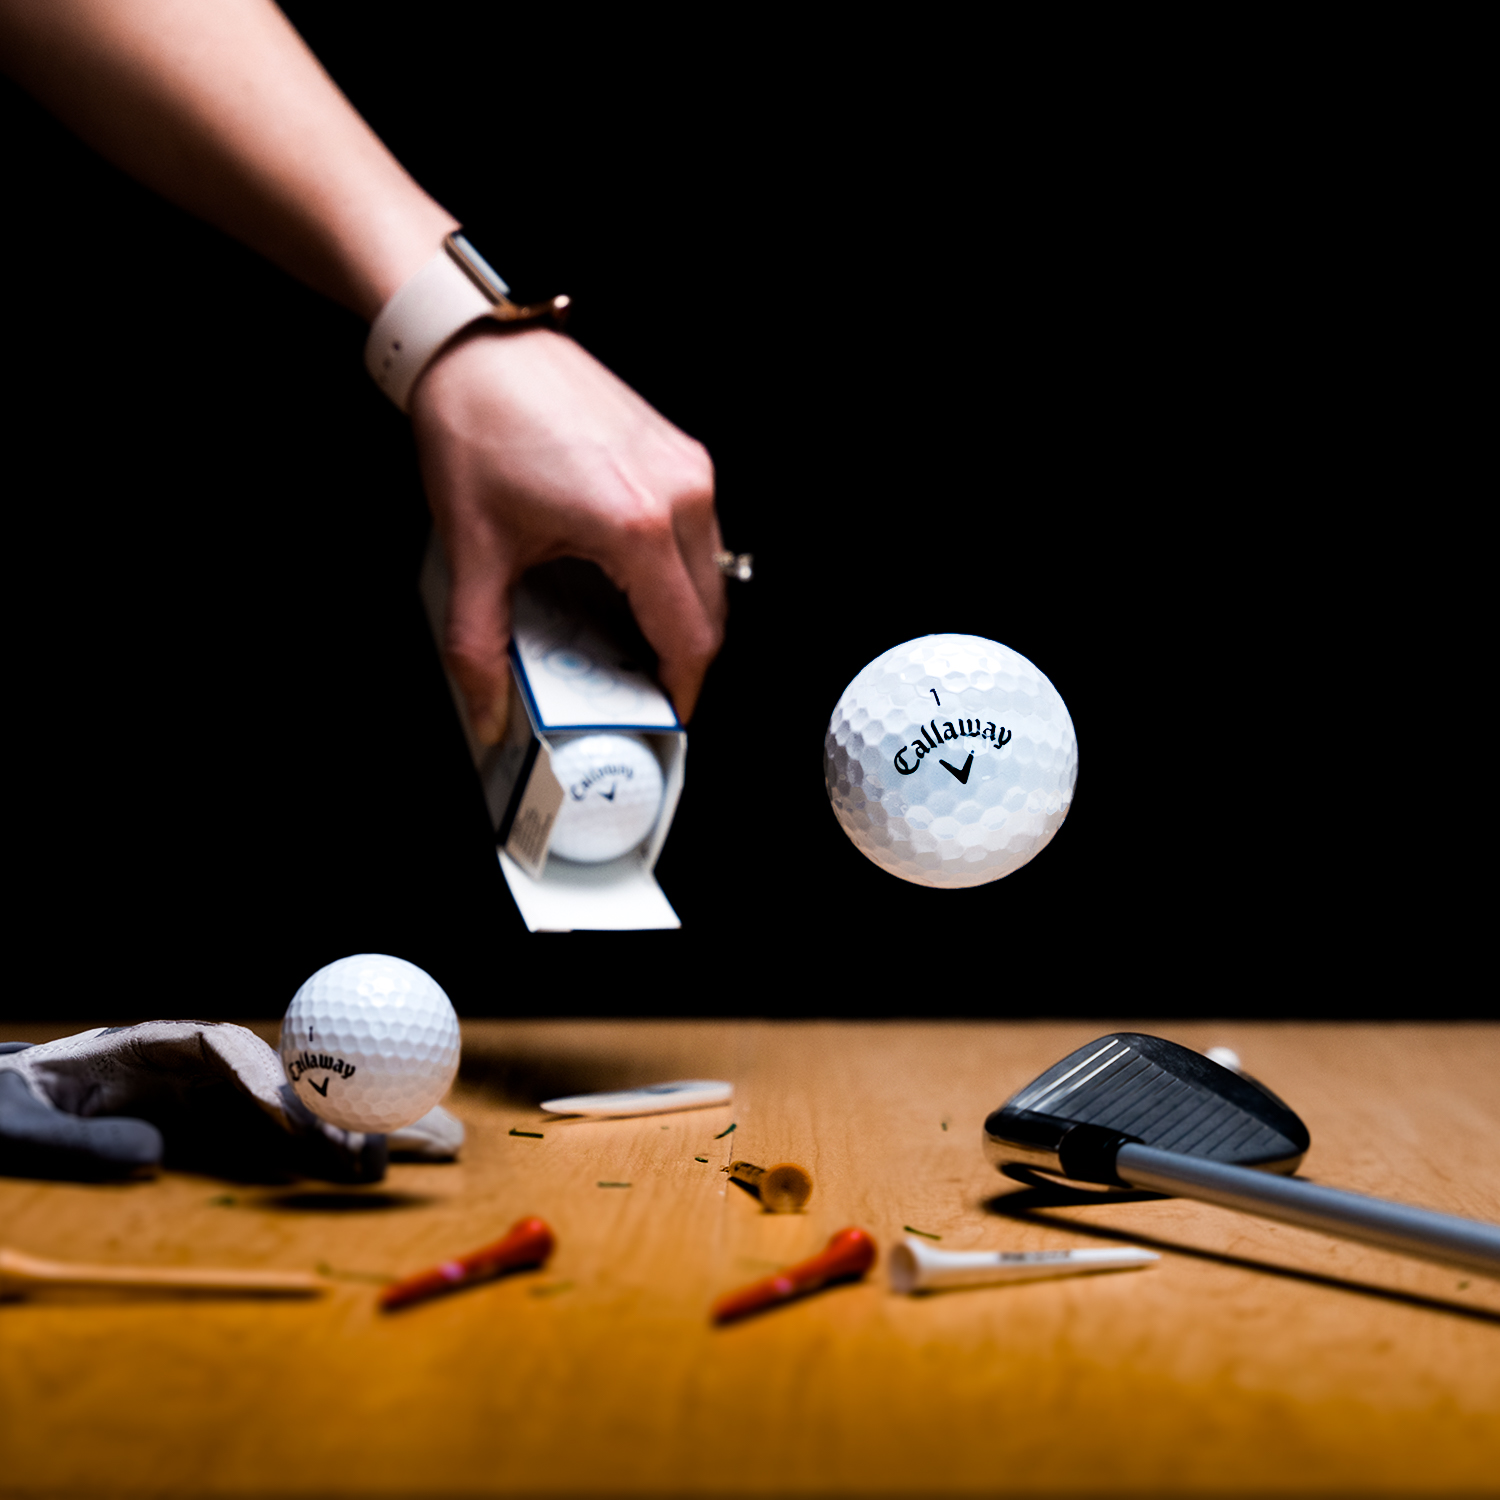 A box of golf balls being opened onto a wooden surface